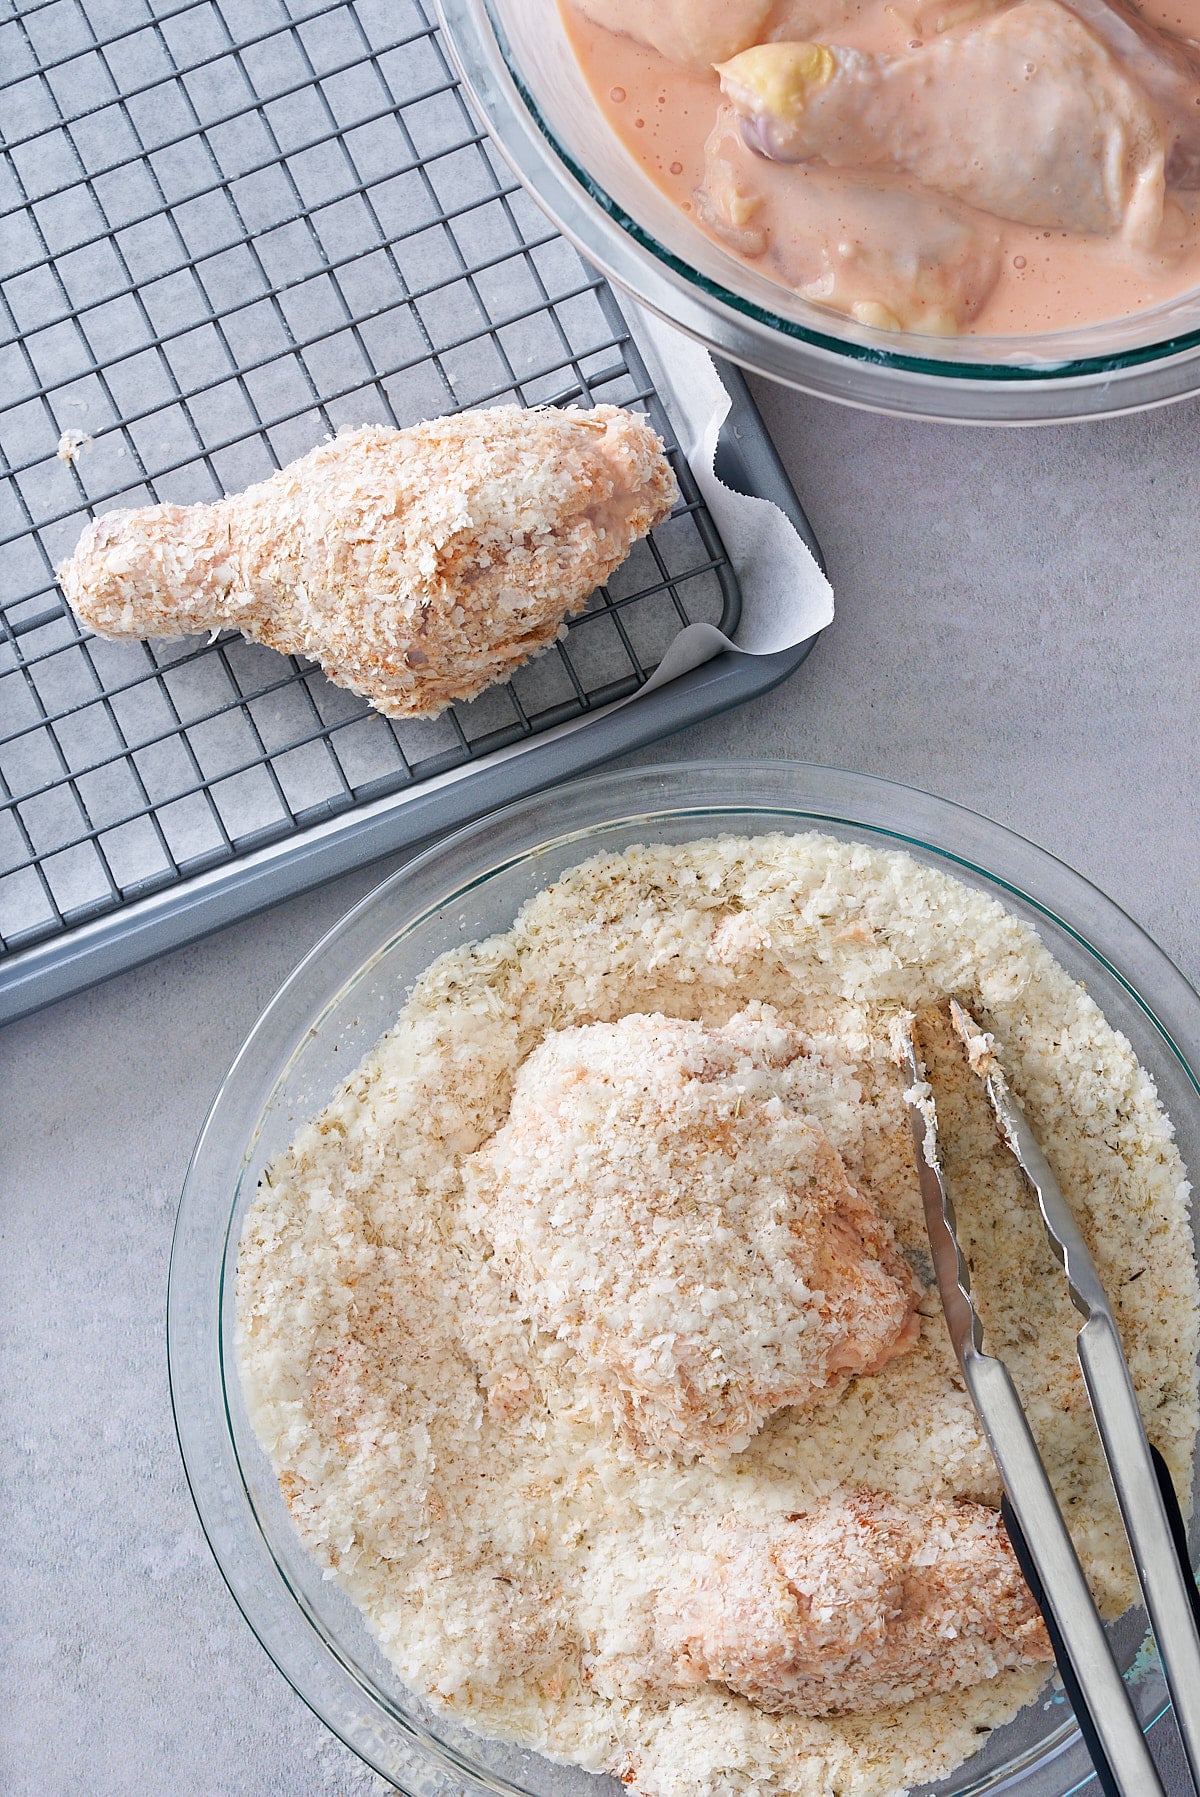 Pieces of chicken being coated in a crumb mix and a tray with a wire rack set on top with crumbed pieces of chicken on top.